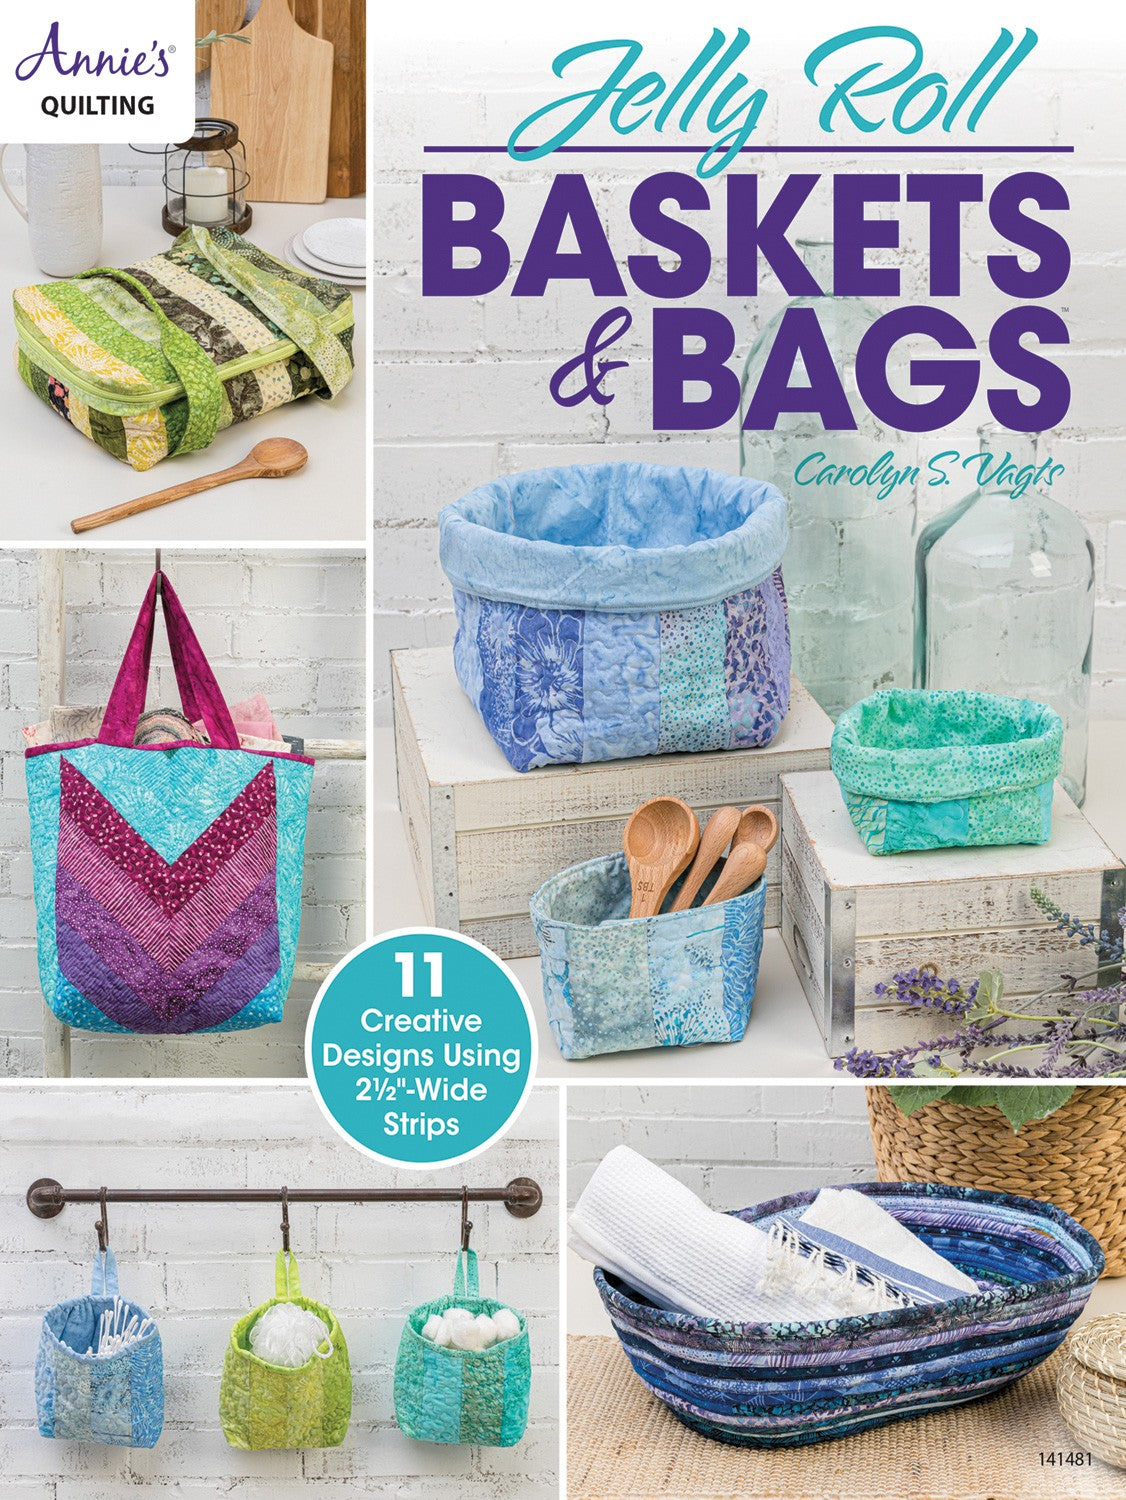 Jelly Roll Baskets & Bags, Notions